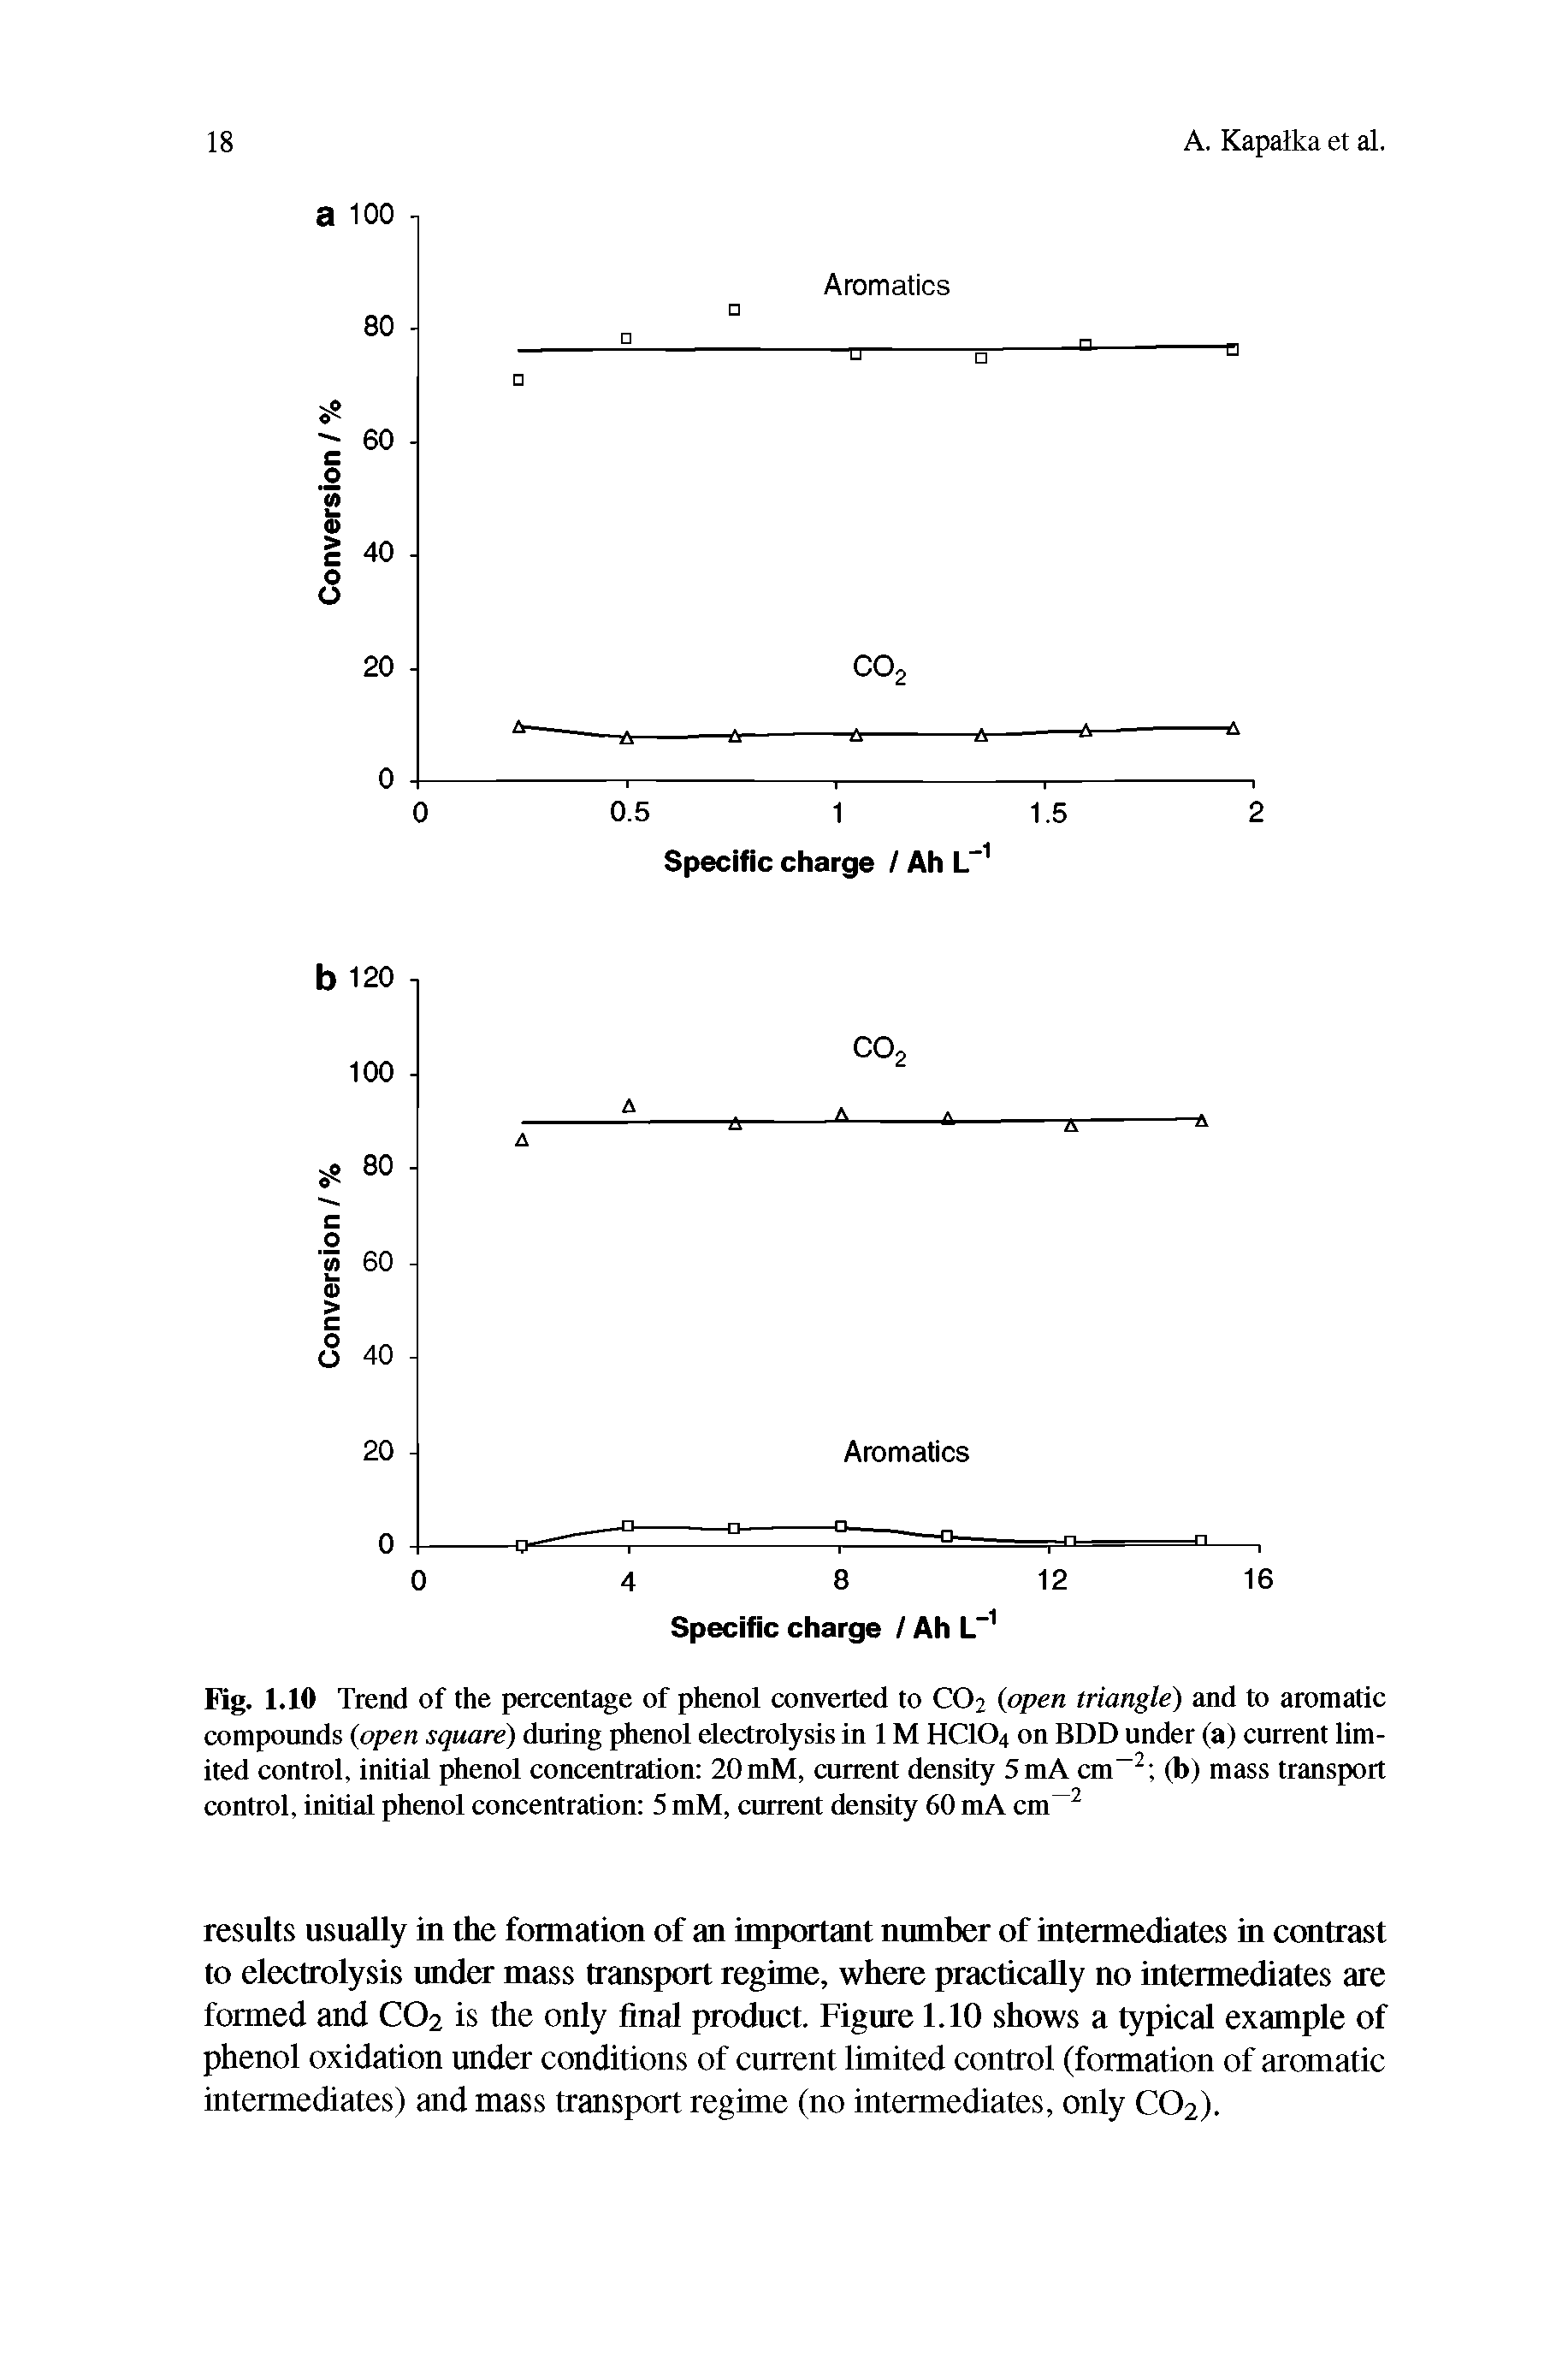 Fig. 1.10 Trend of the percentage of phenol converted to CO2 (open triangle) and to aromatic compounds (open square) during phenol electrolysis in 1M HCIO4 on BDD under (a) current limited control, initial phenol concentration 20mM, current density 5mA cm-2 (b) mass transport control, initial phenol concentration 5 mM, current density 60 mA cm 2...